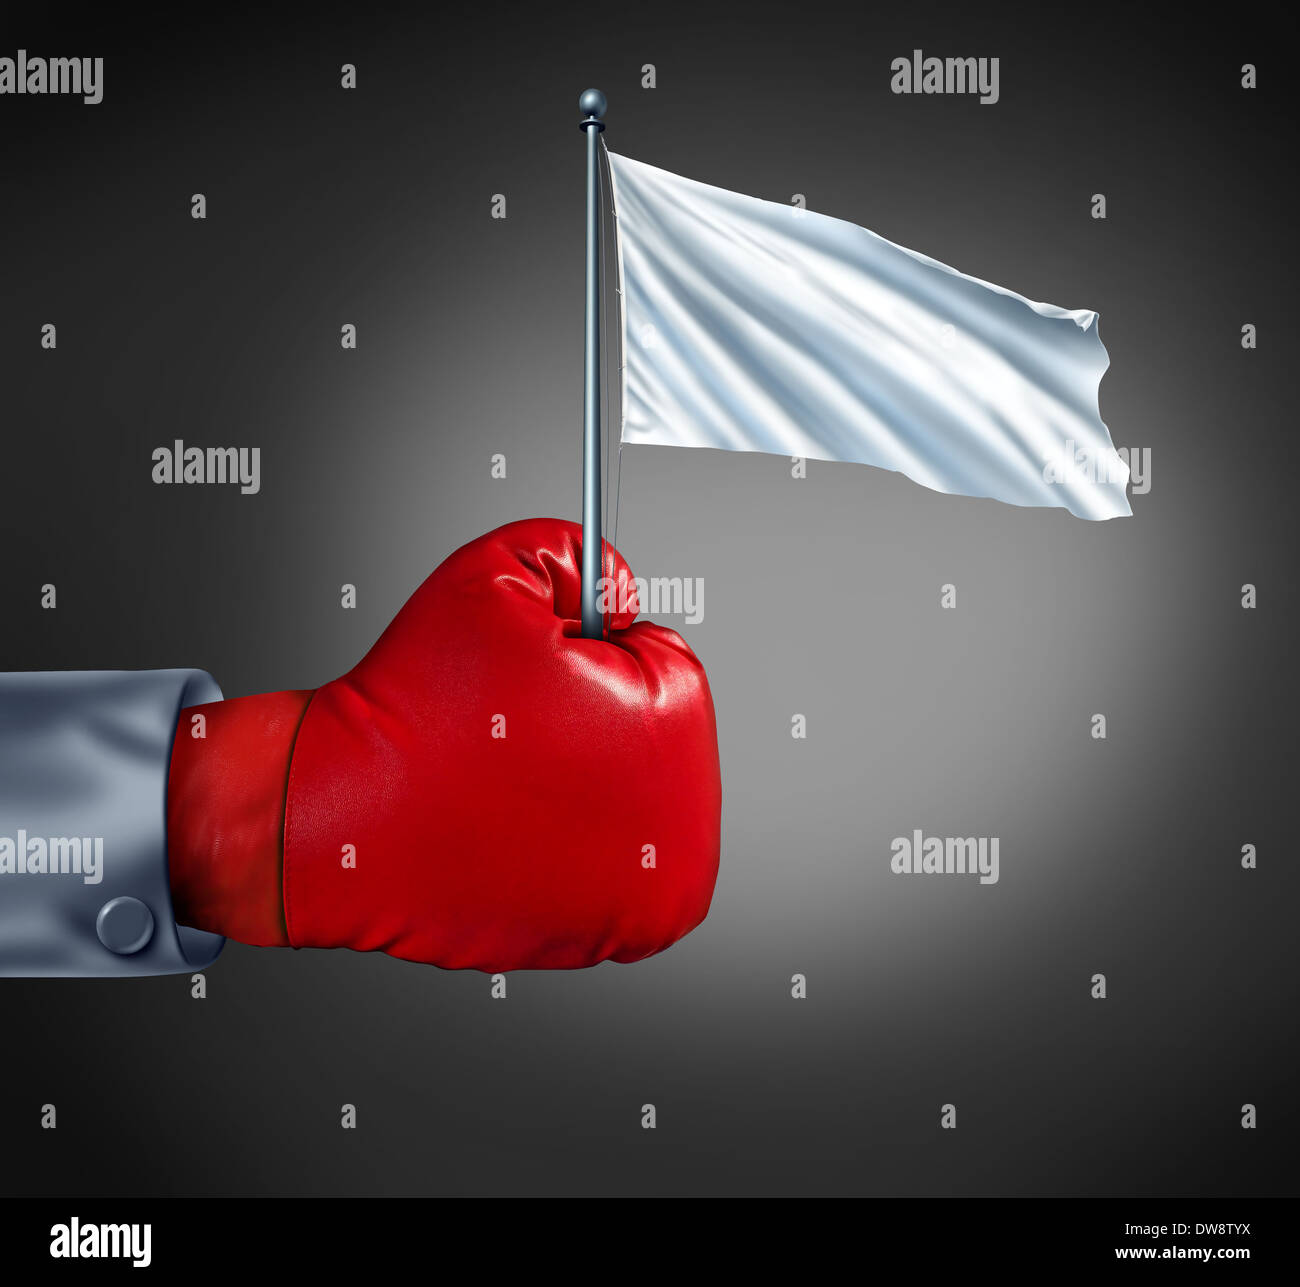 Business surrender as a metaphor for retreat in finance with a red boxing glove holding a blank cloth on a flagpole as an icon of giving up the fight and competition loss. Stock Photo